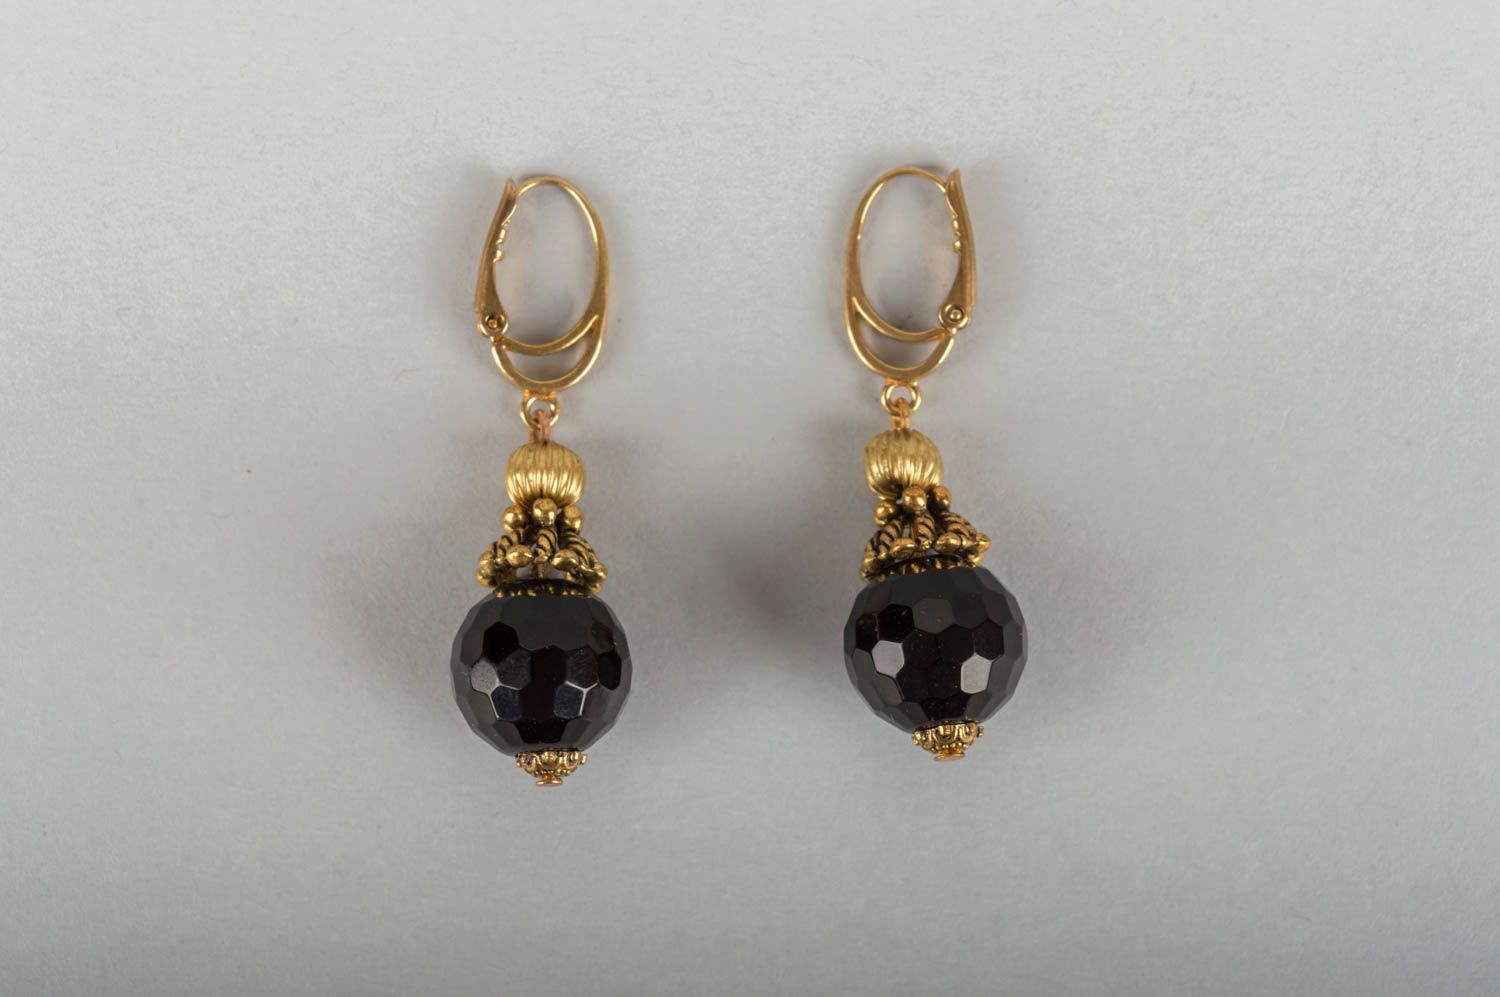 Handmade stylish earrings made of natural stone agate and brass fittings photo 2